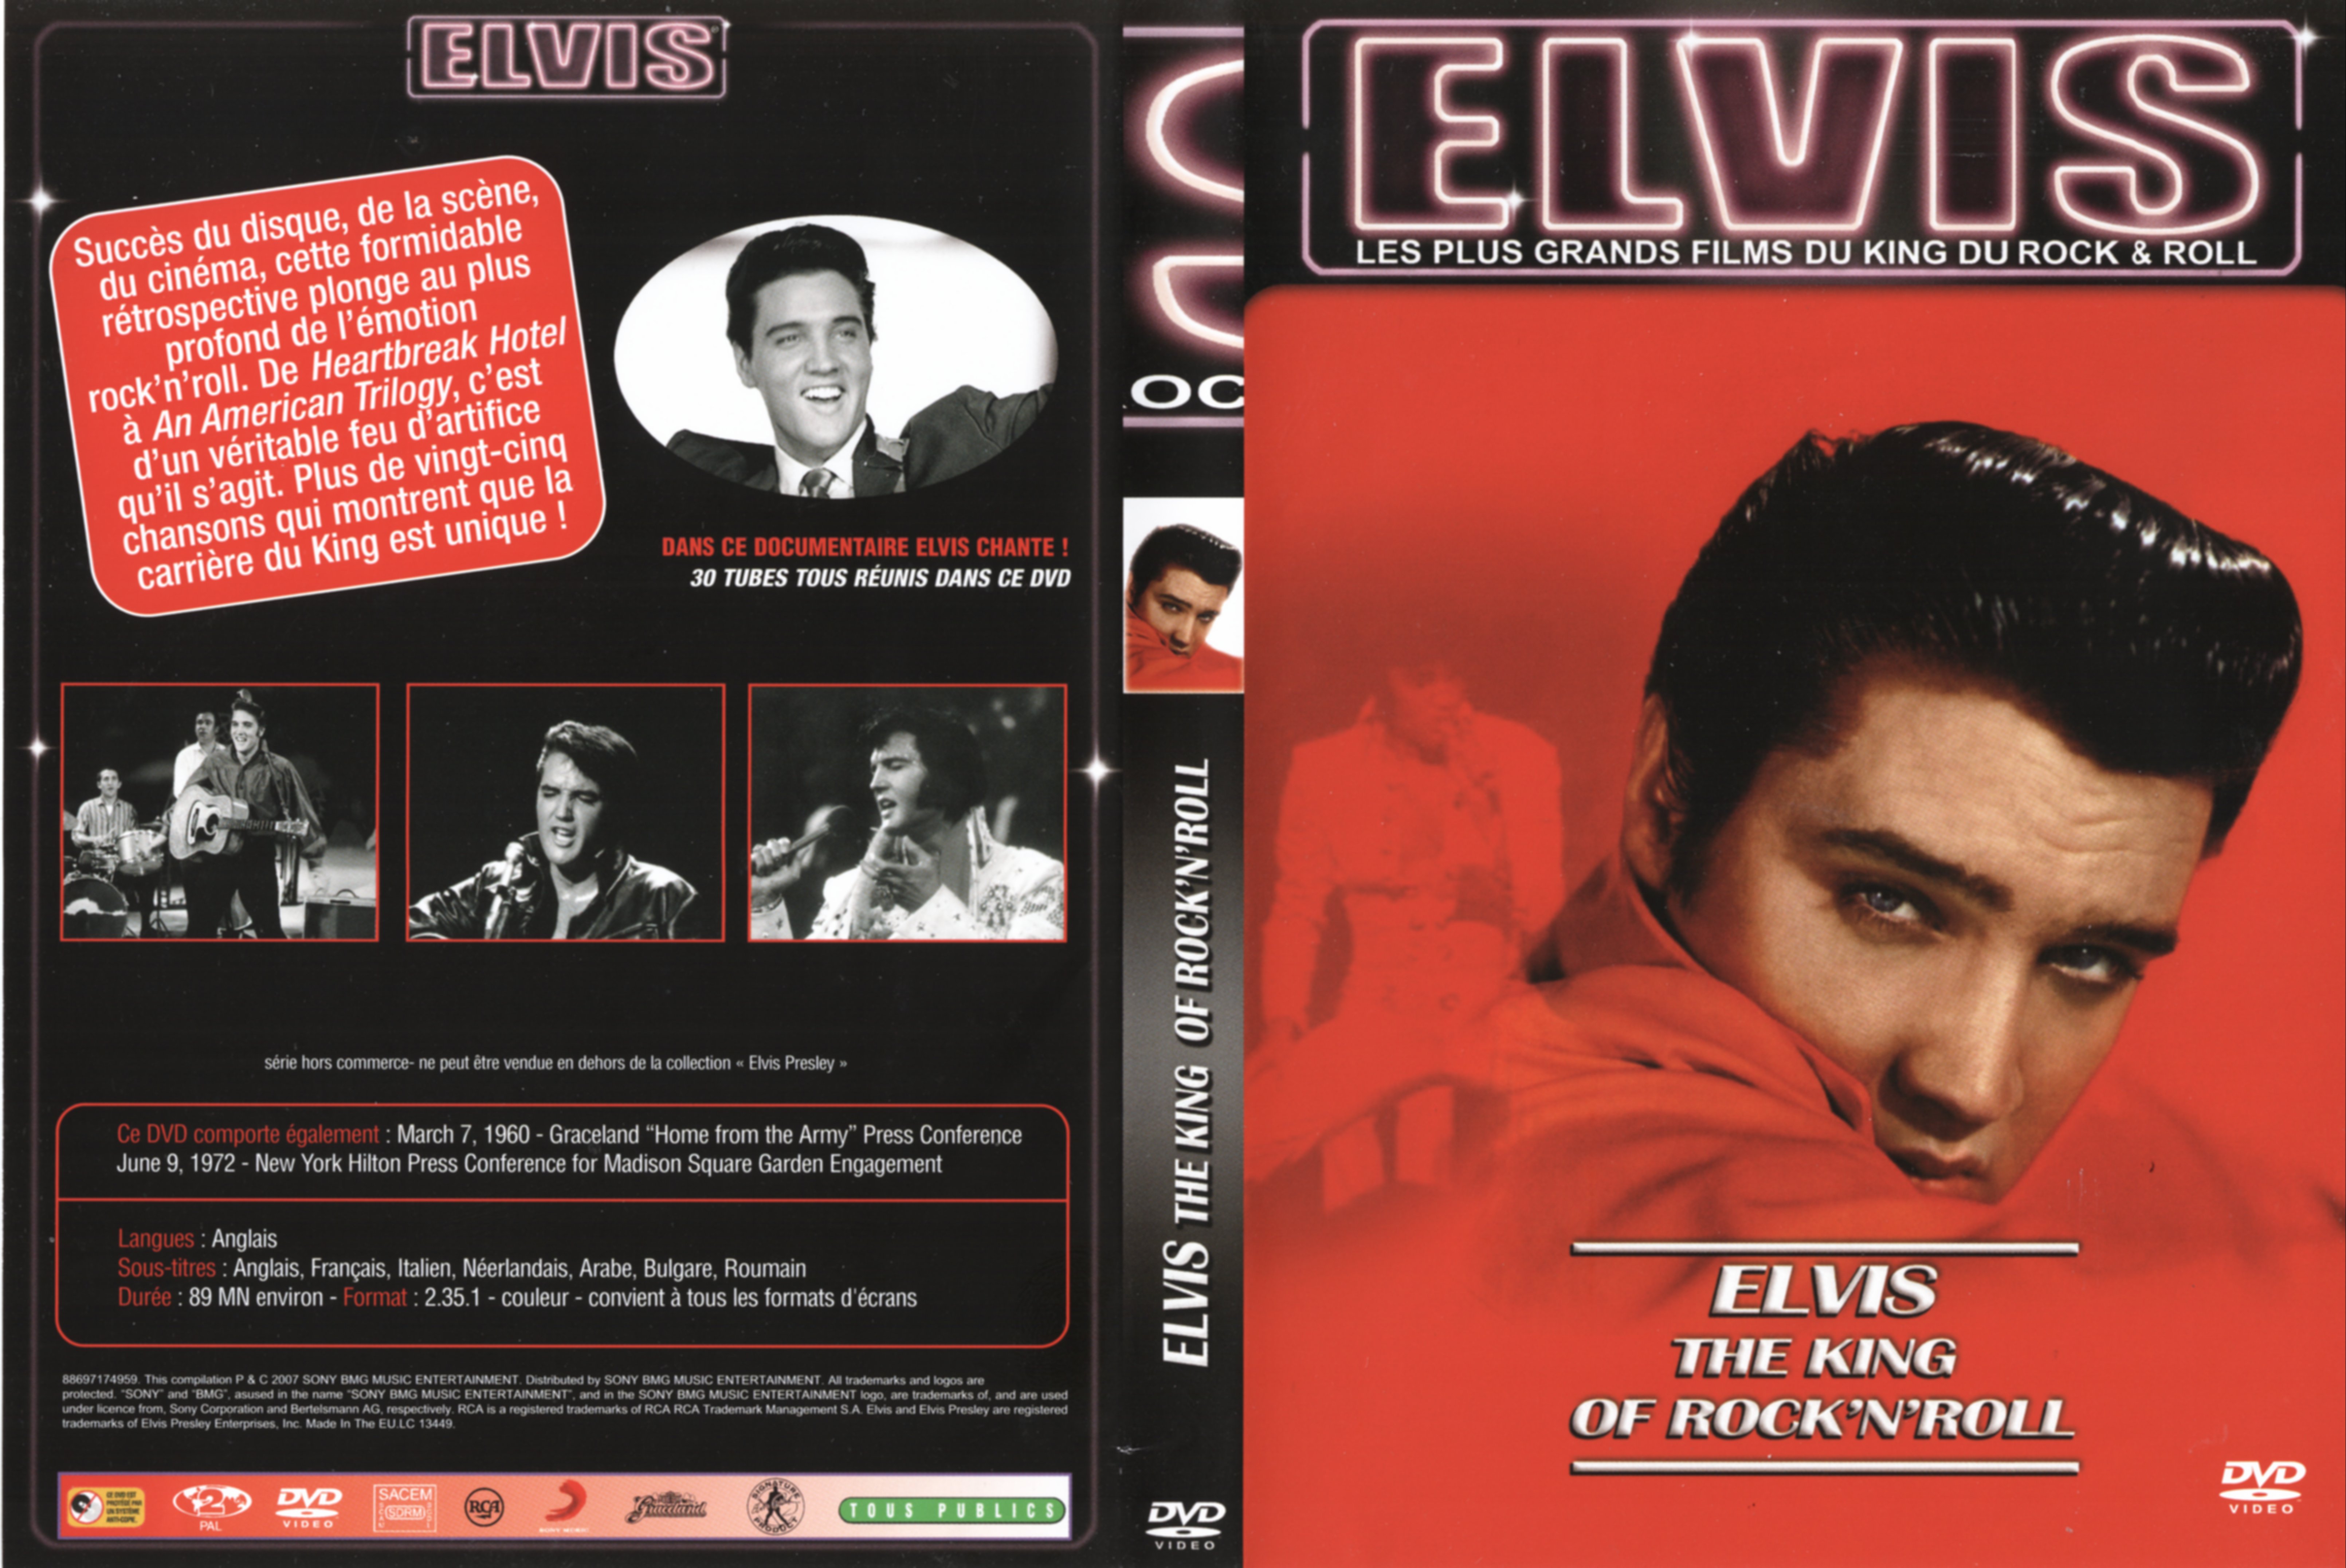 Jaquette DVD Elvis the king of rock